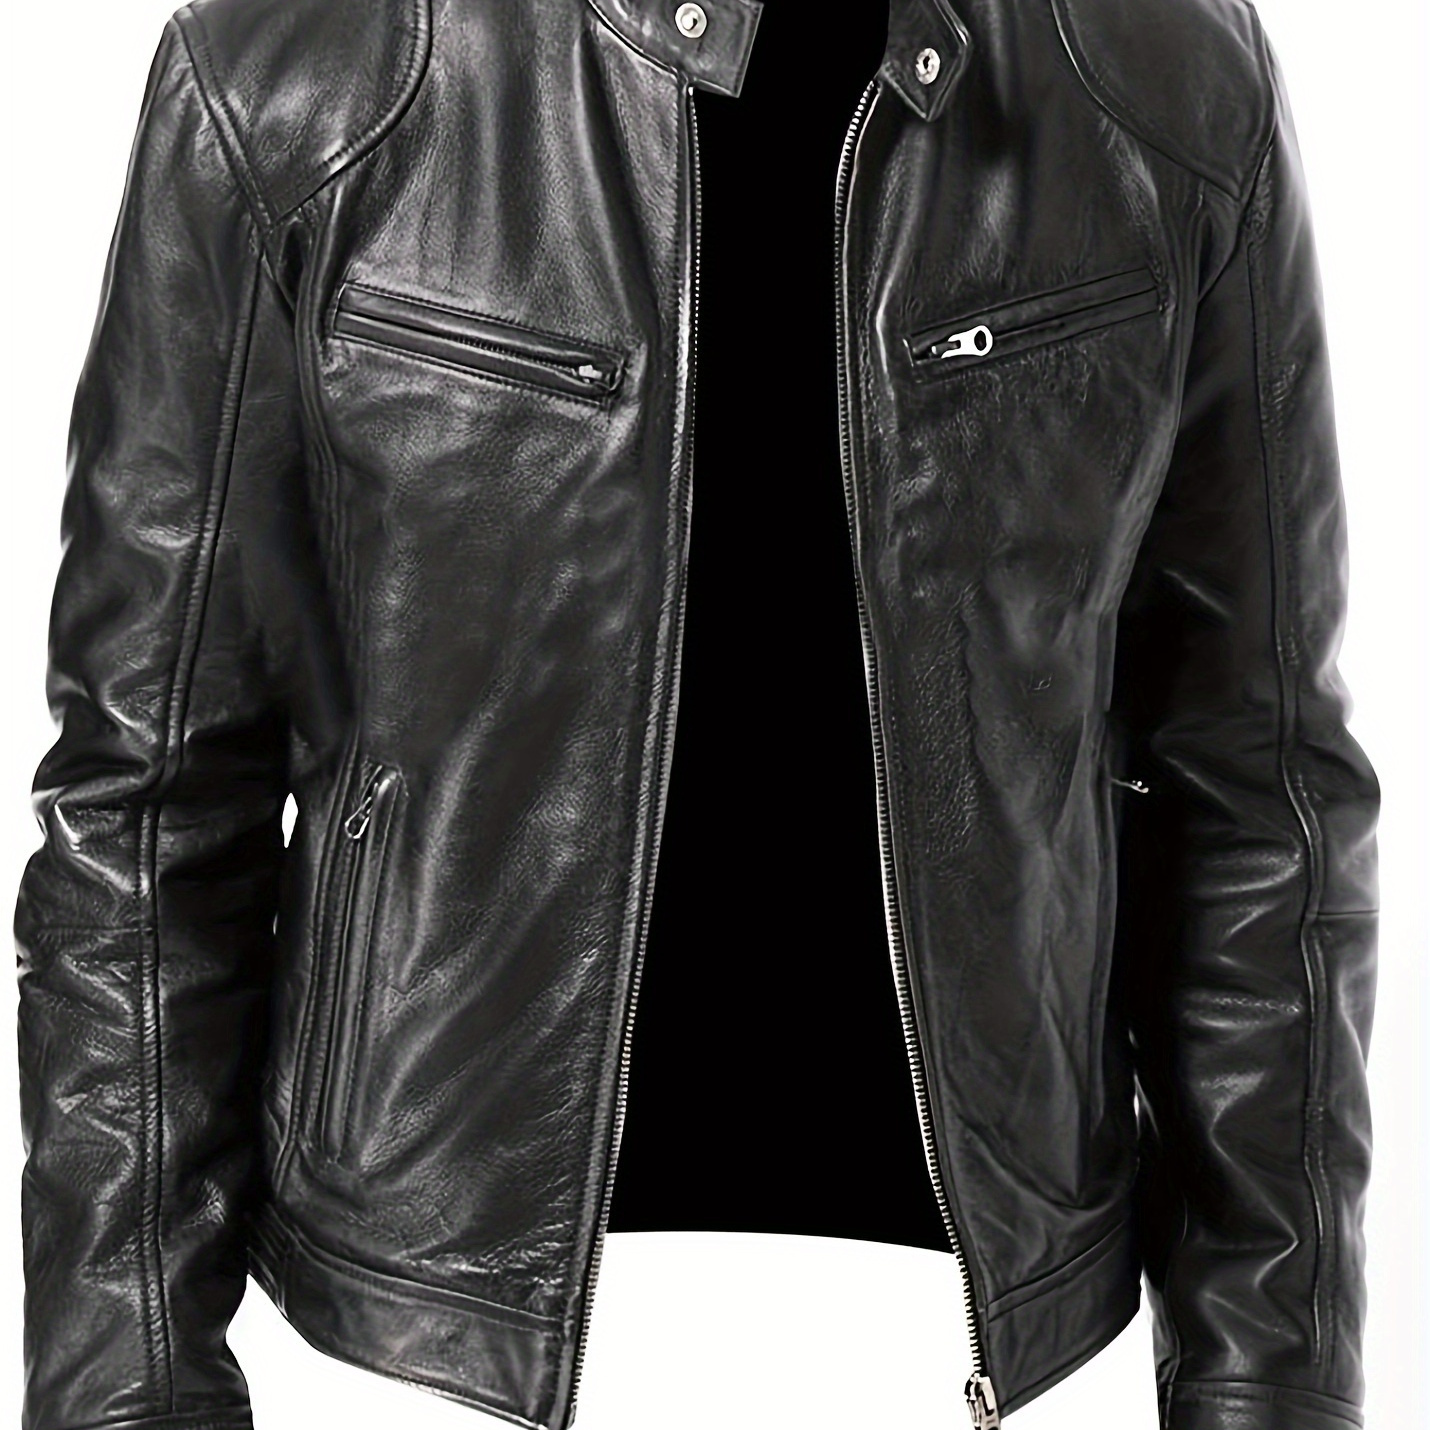 

Men's Solid Pu Leather Jacket, Full Zip-up Stand Collar Motorcycle Bomb Jacket For Outdoor, Spring And Autumn